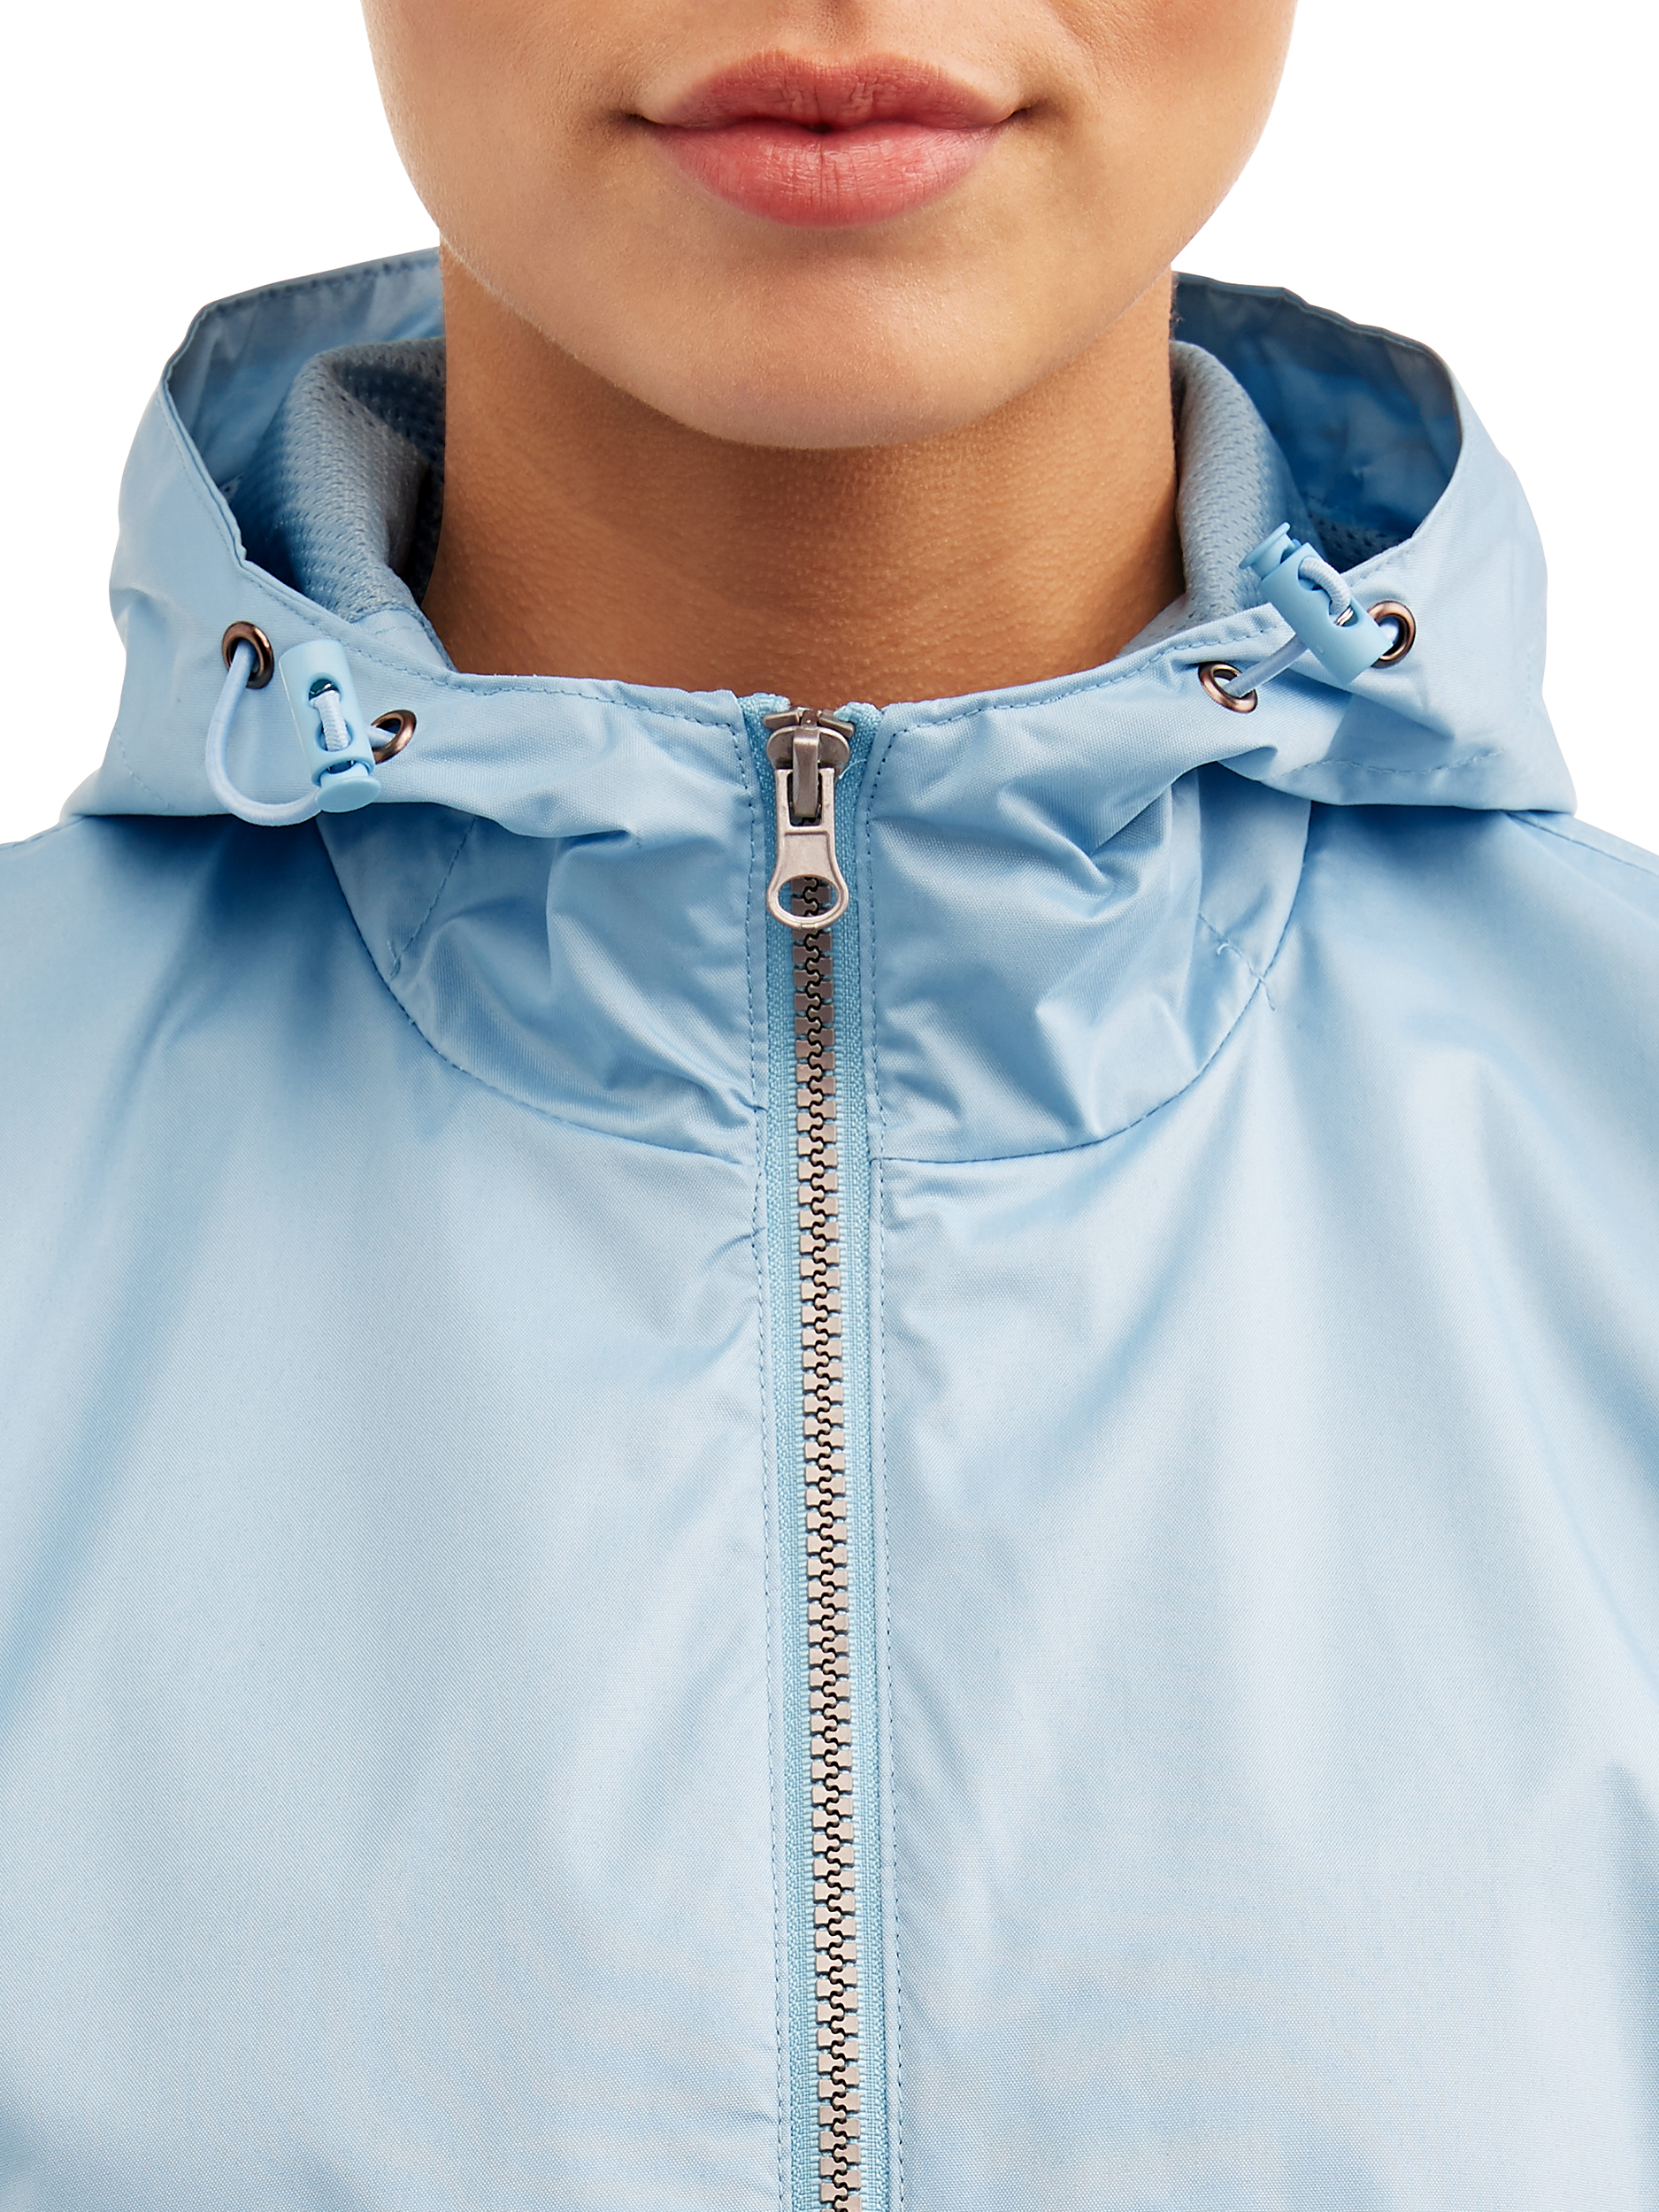 Climate Concepts Women's Hooded Windbreaker Jacket - image 3 of 4